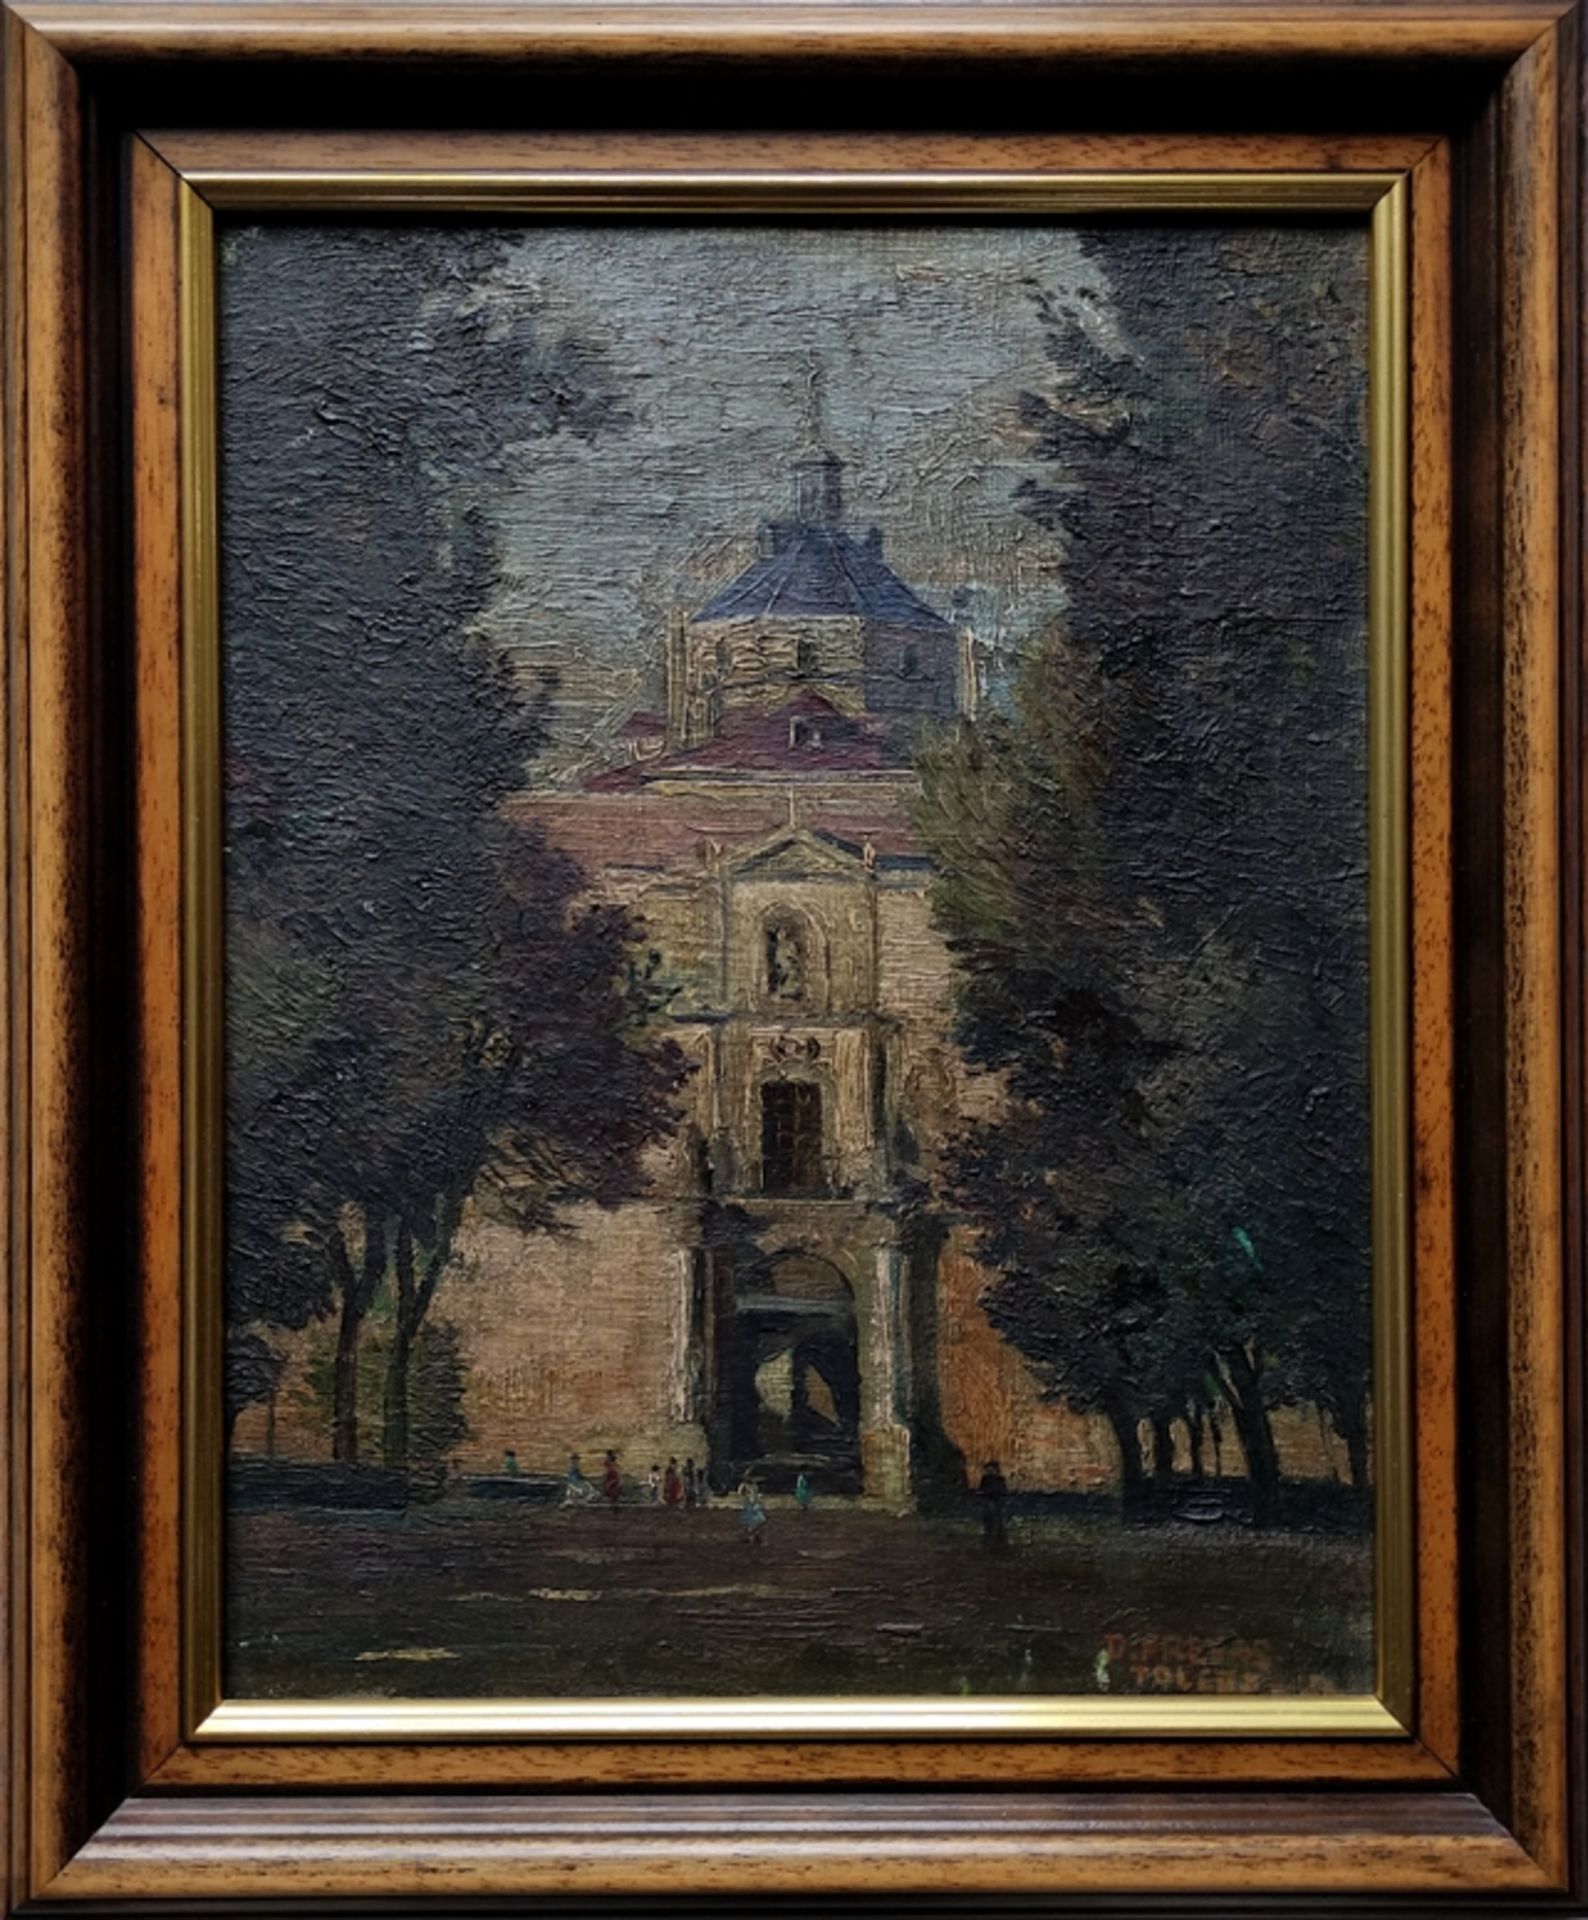 Frexas, Dolores "Lola" (1924 - 2011) "Hospital de Tavera", in Toleda, oil on canvas, signed and ins - Image 2 of 4